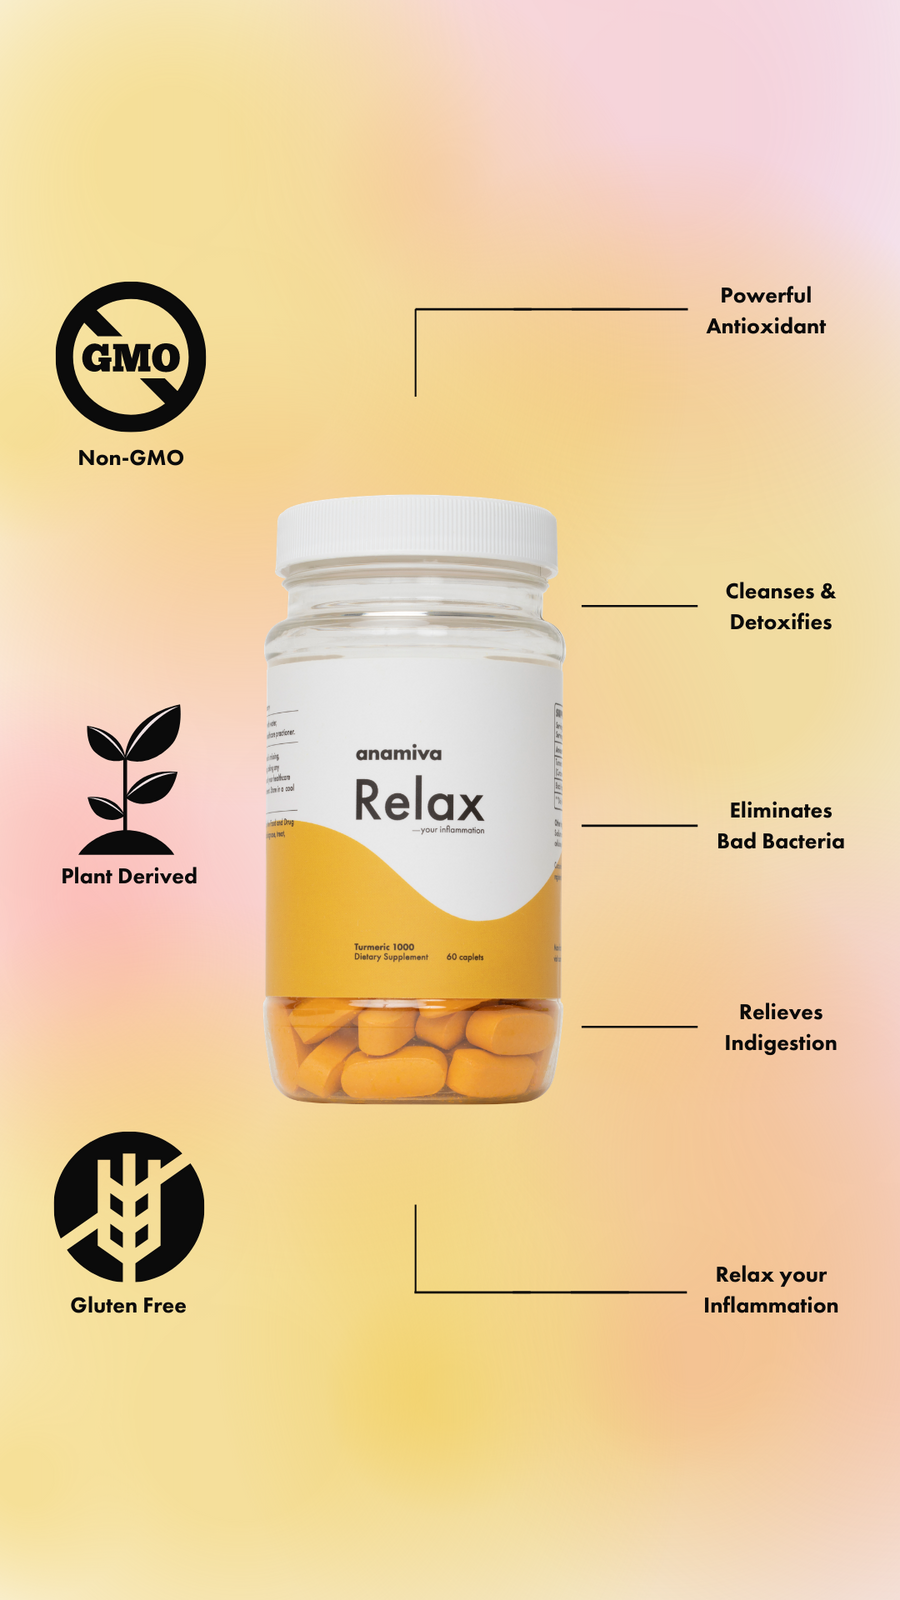 Inflammation Relief | Relax